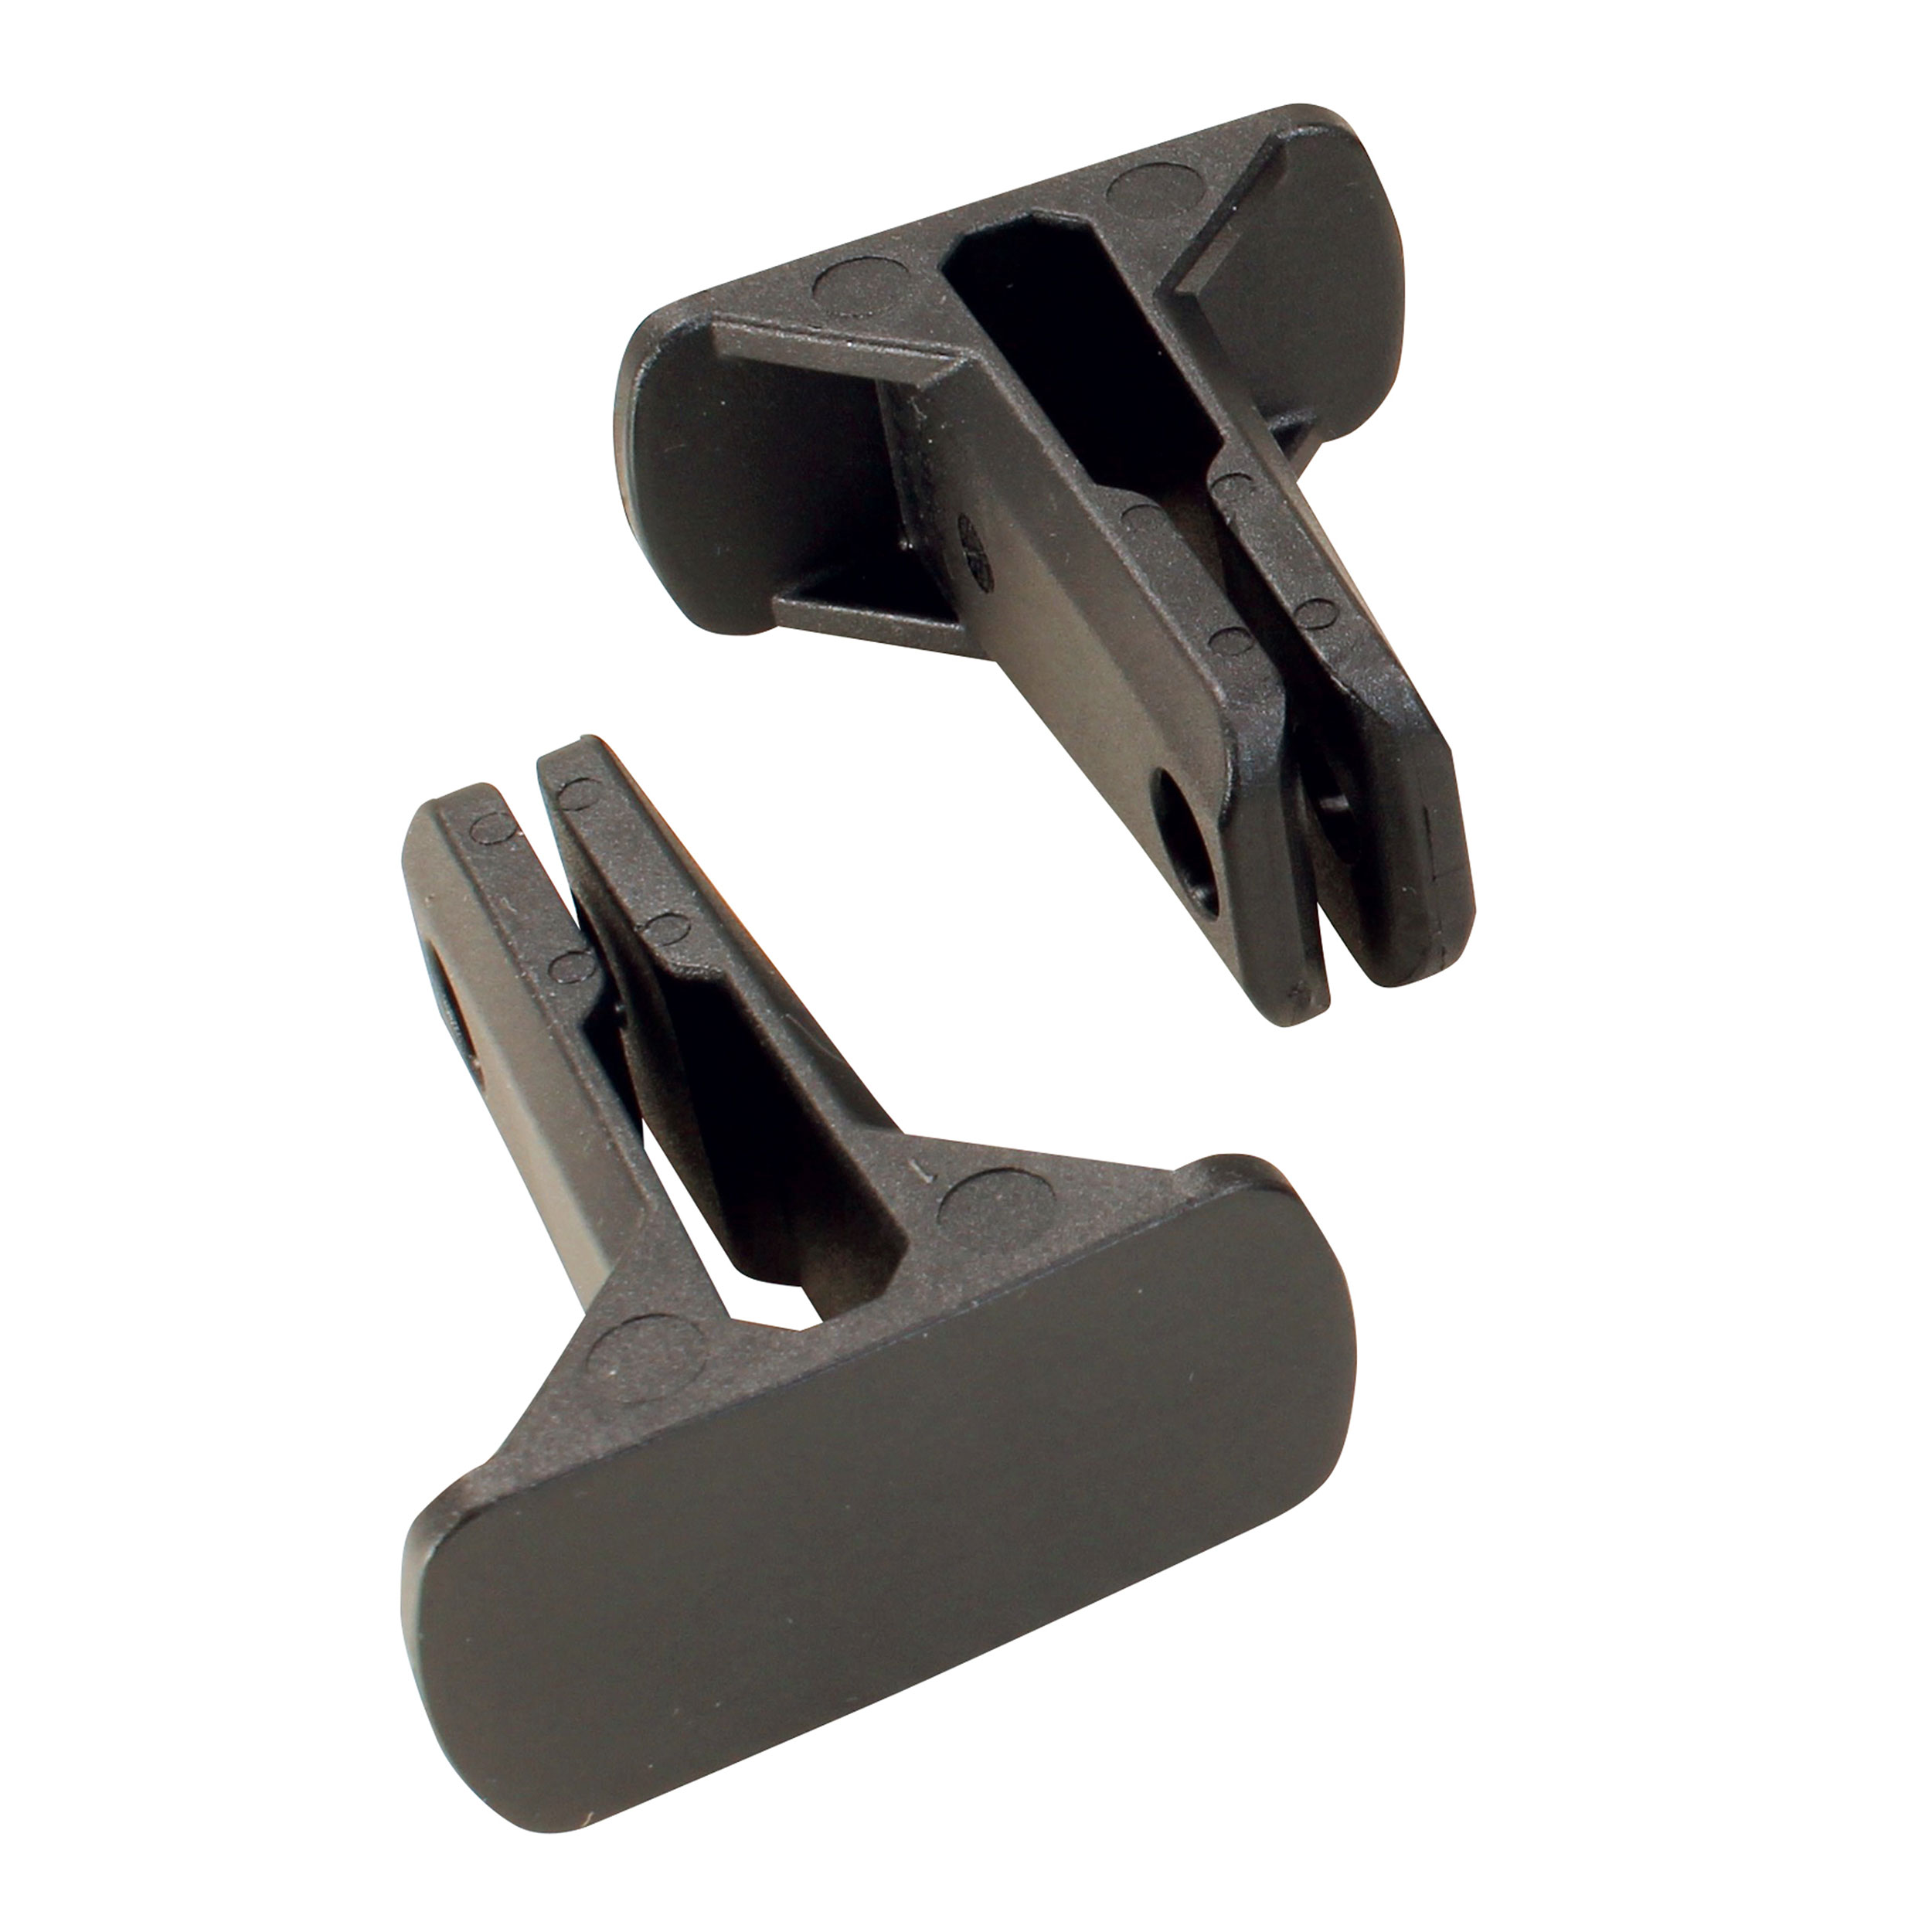 Revo Replacement Rail Protection Pads, Pair, Model Kre-rpp